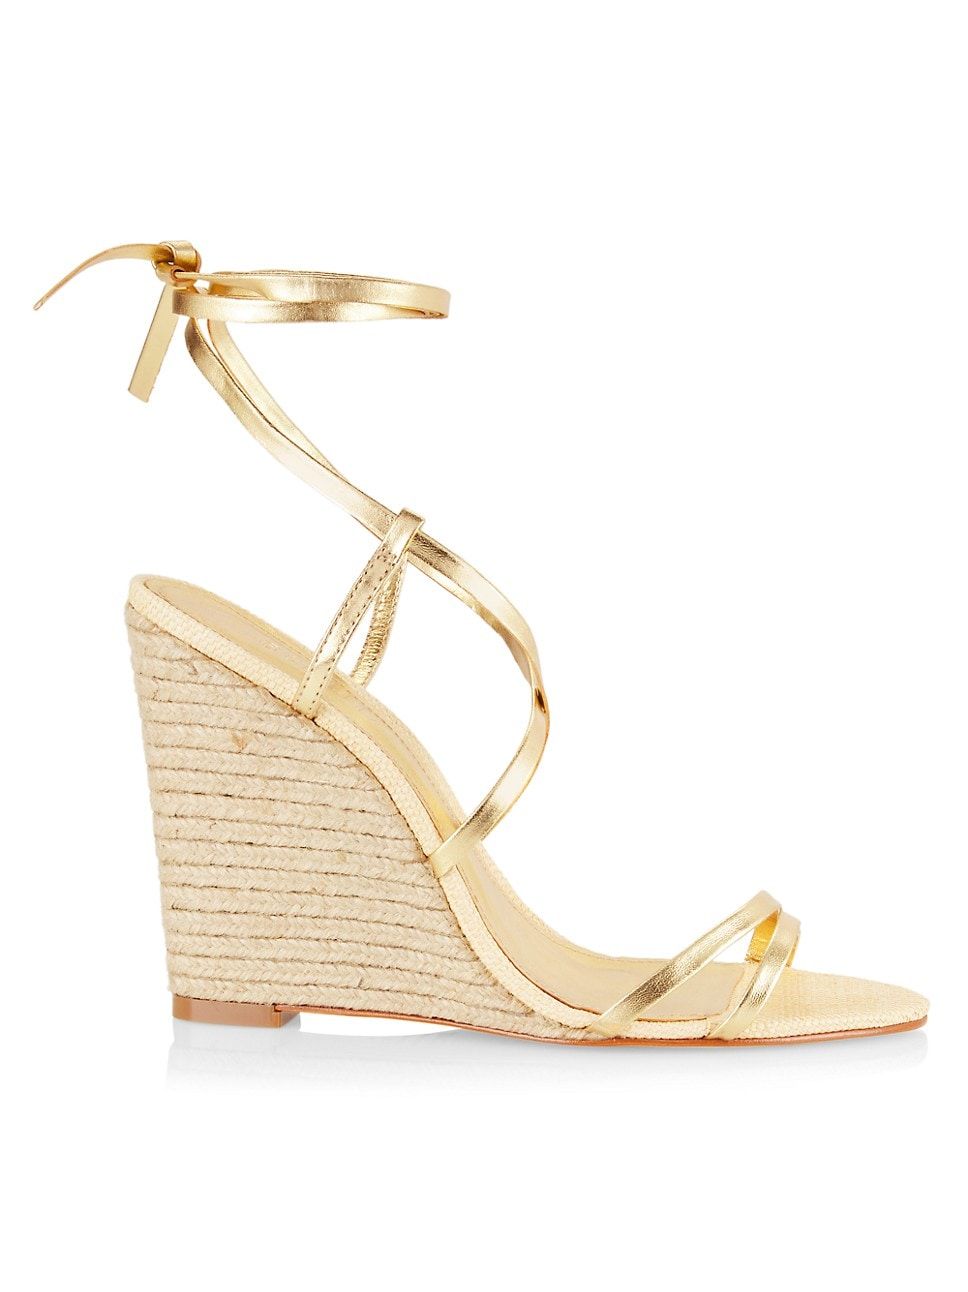 Deonne Leather Wedge Sandals | Saks Fifth Avenue